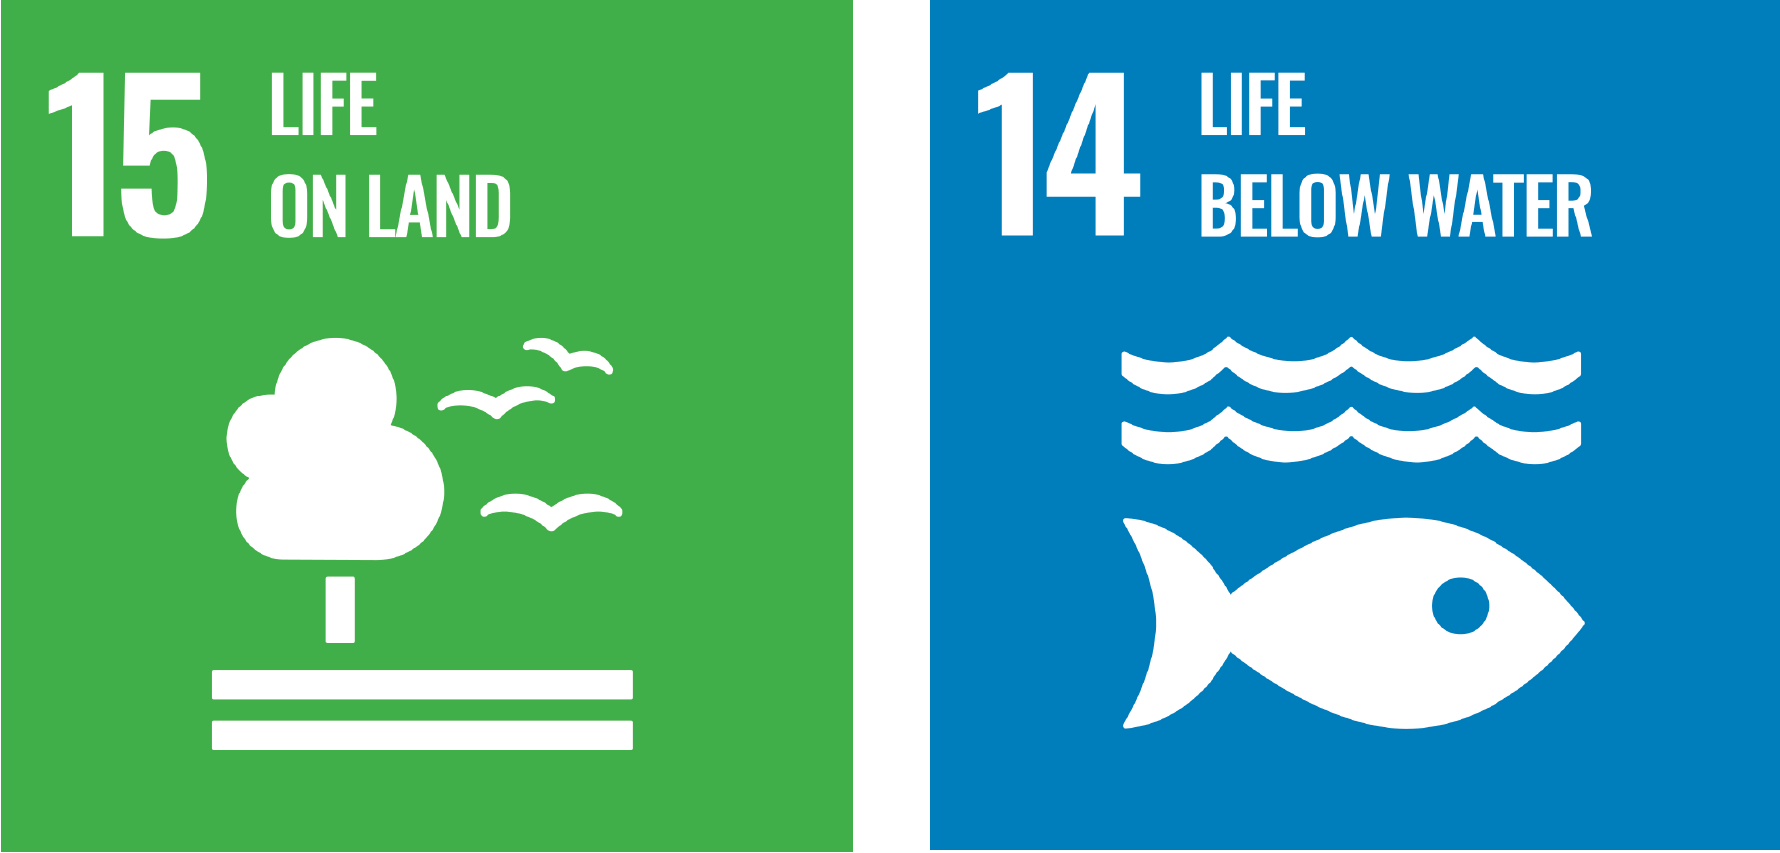 Sustainable Development Goals 14 and 15 icons for intego travel conservation travel guide